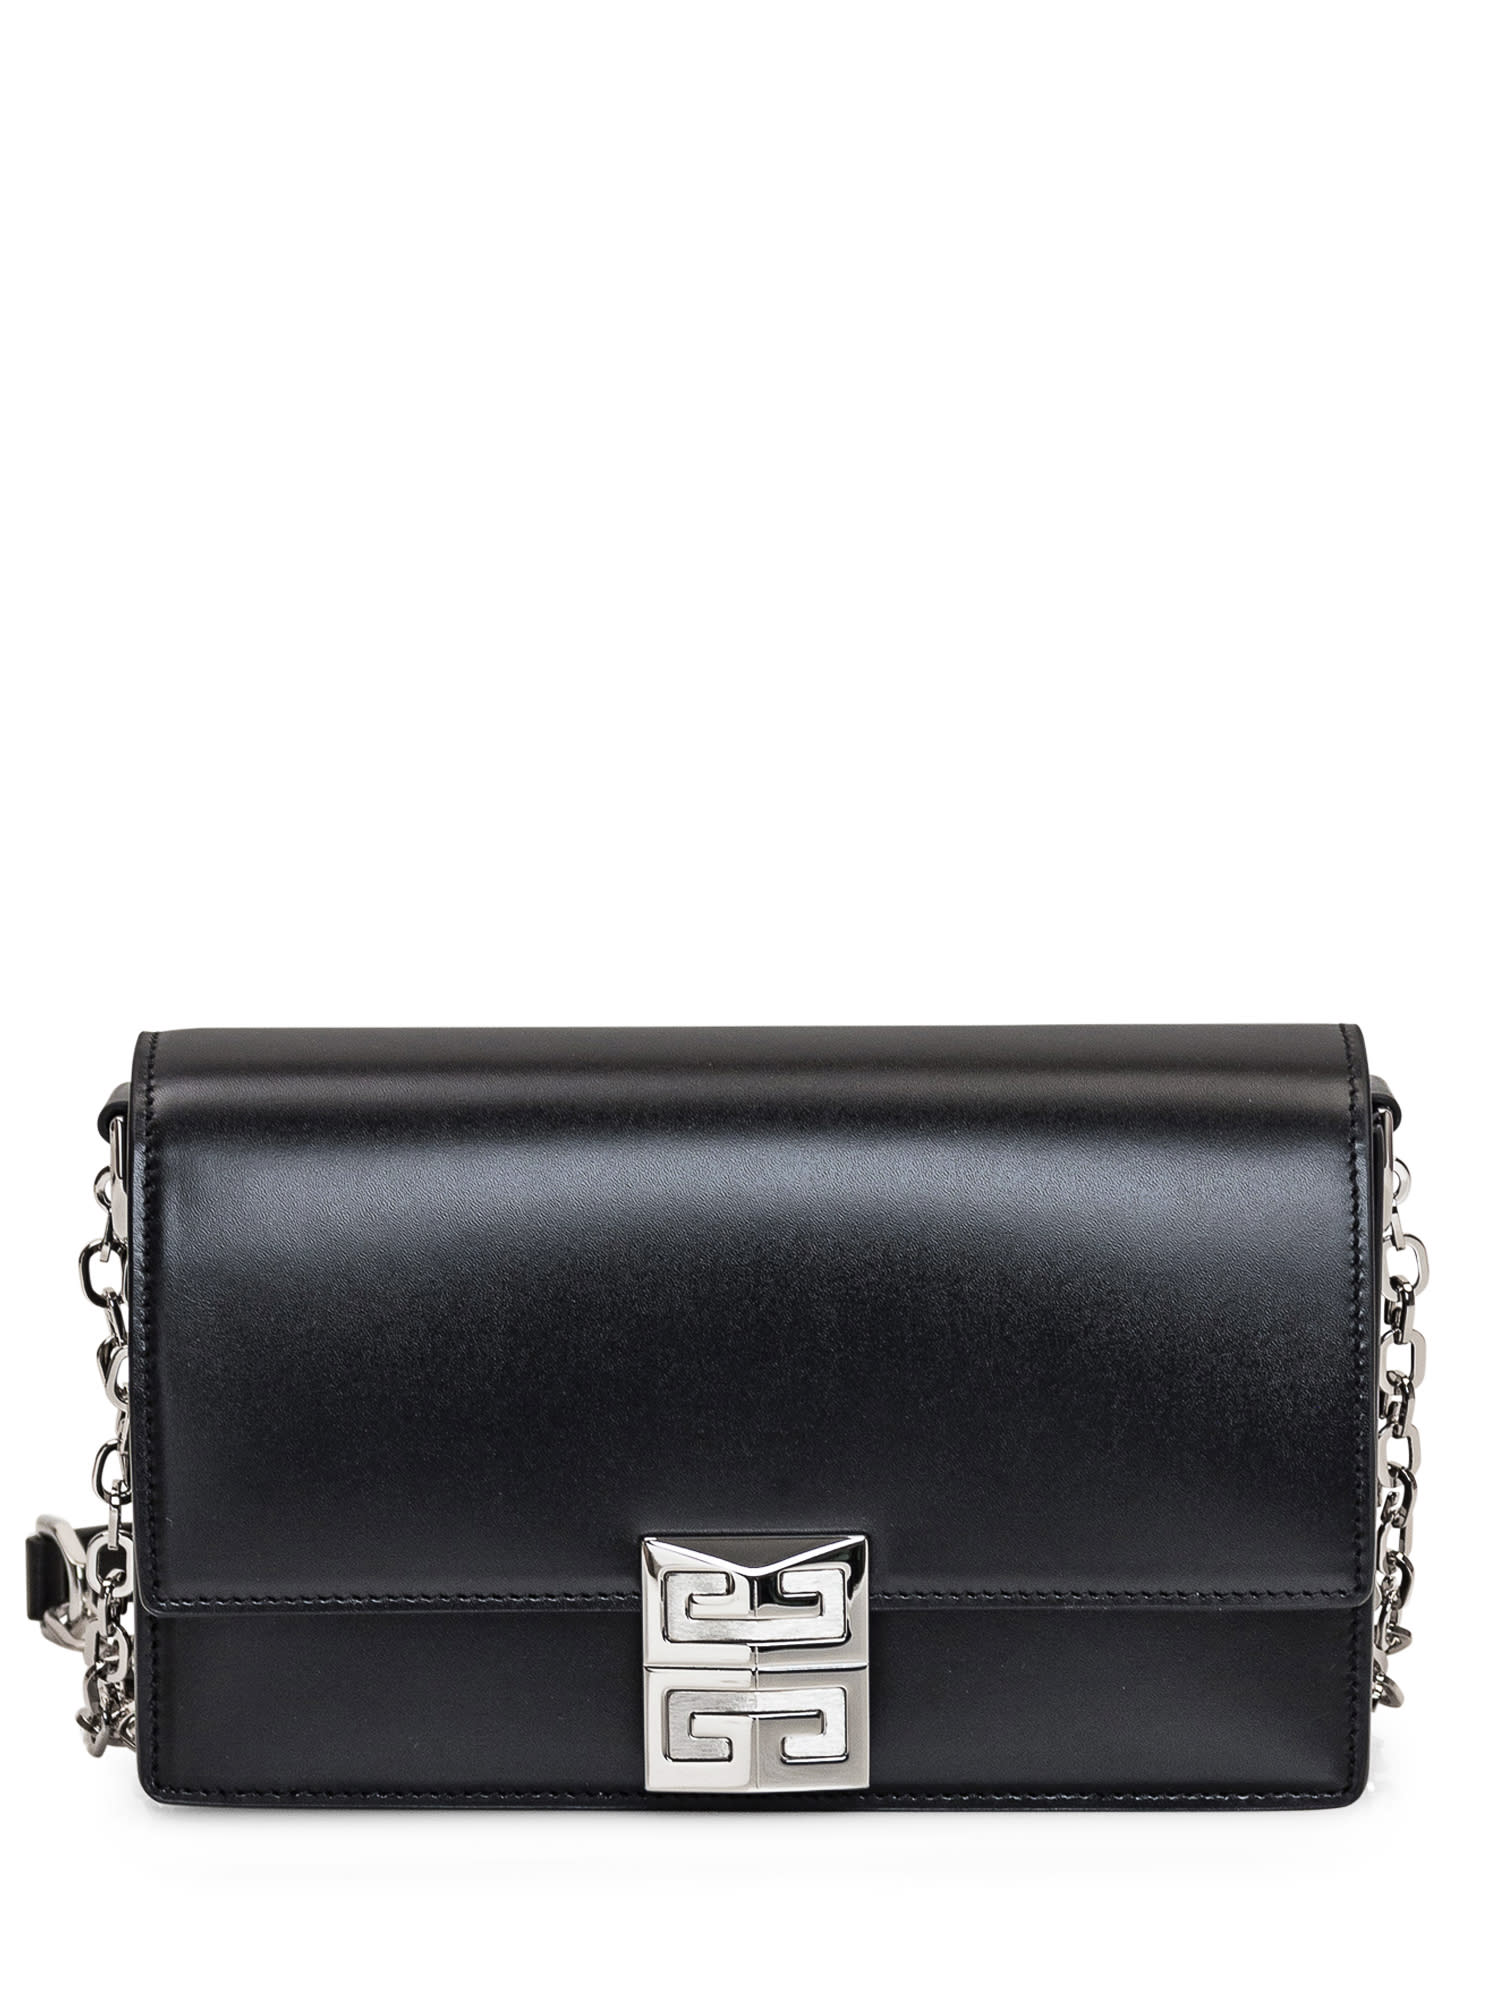 Givenchy 4g Small Bag In Black